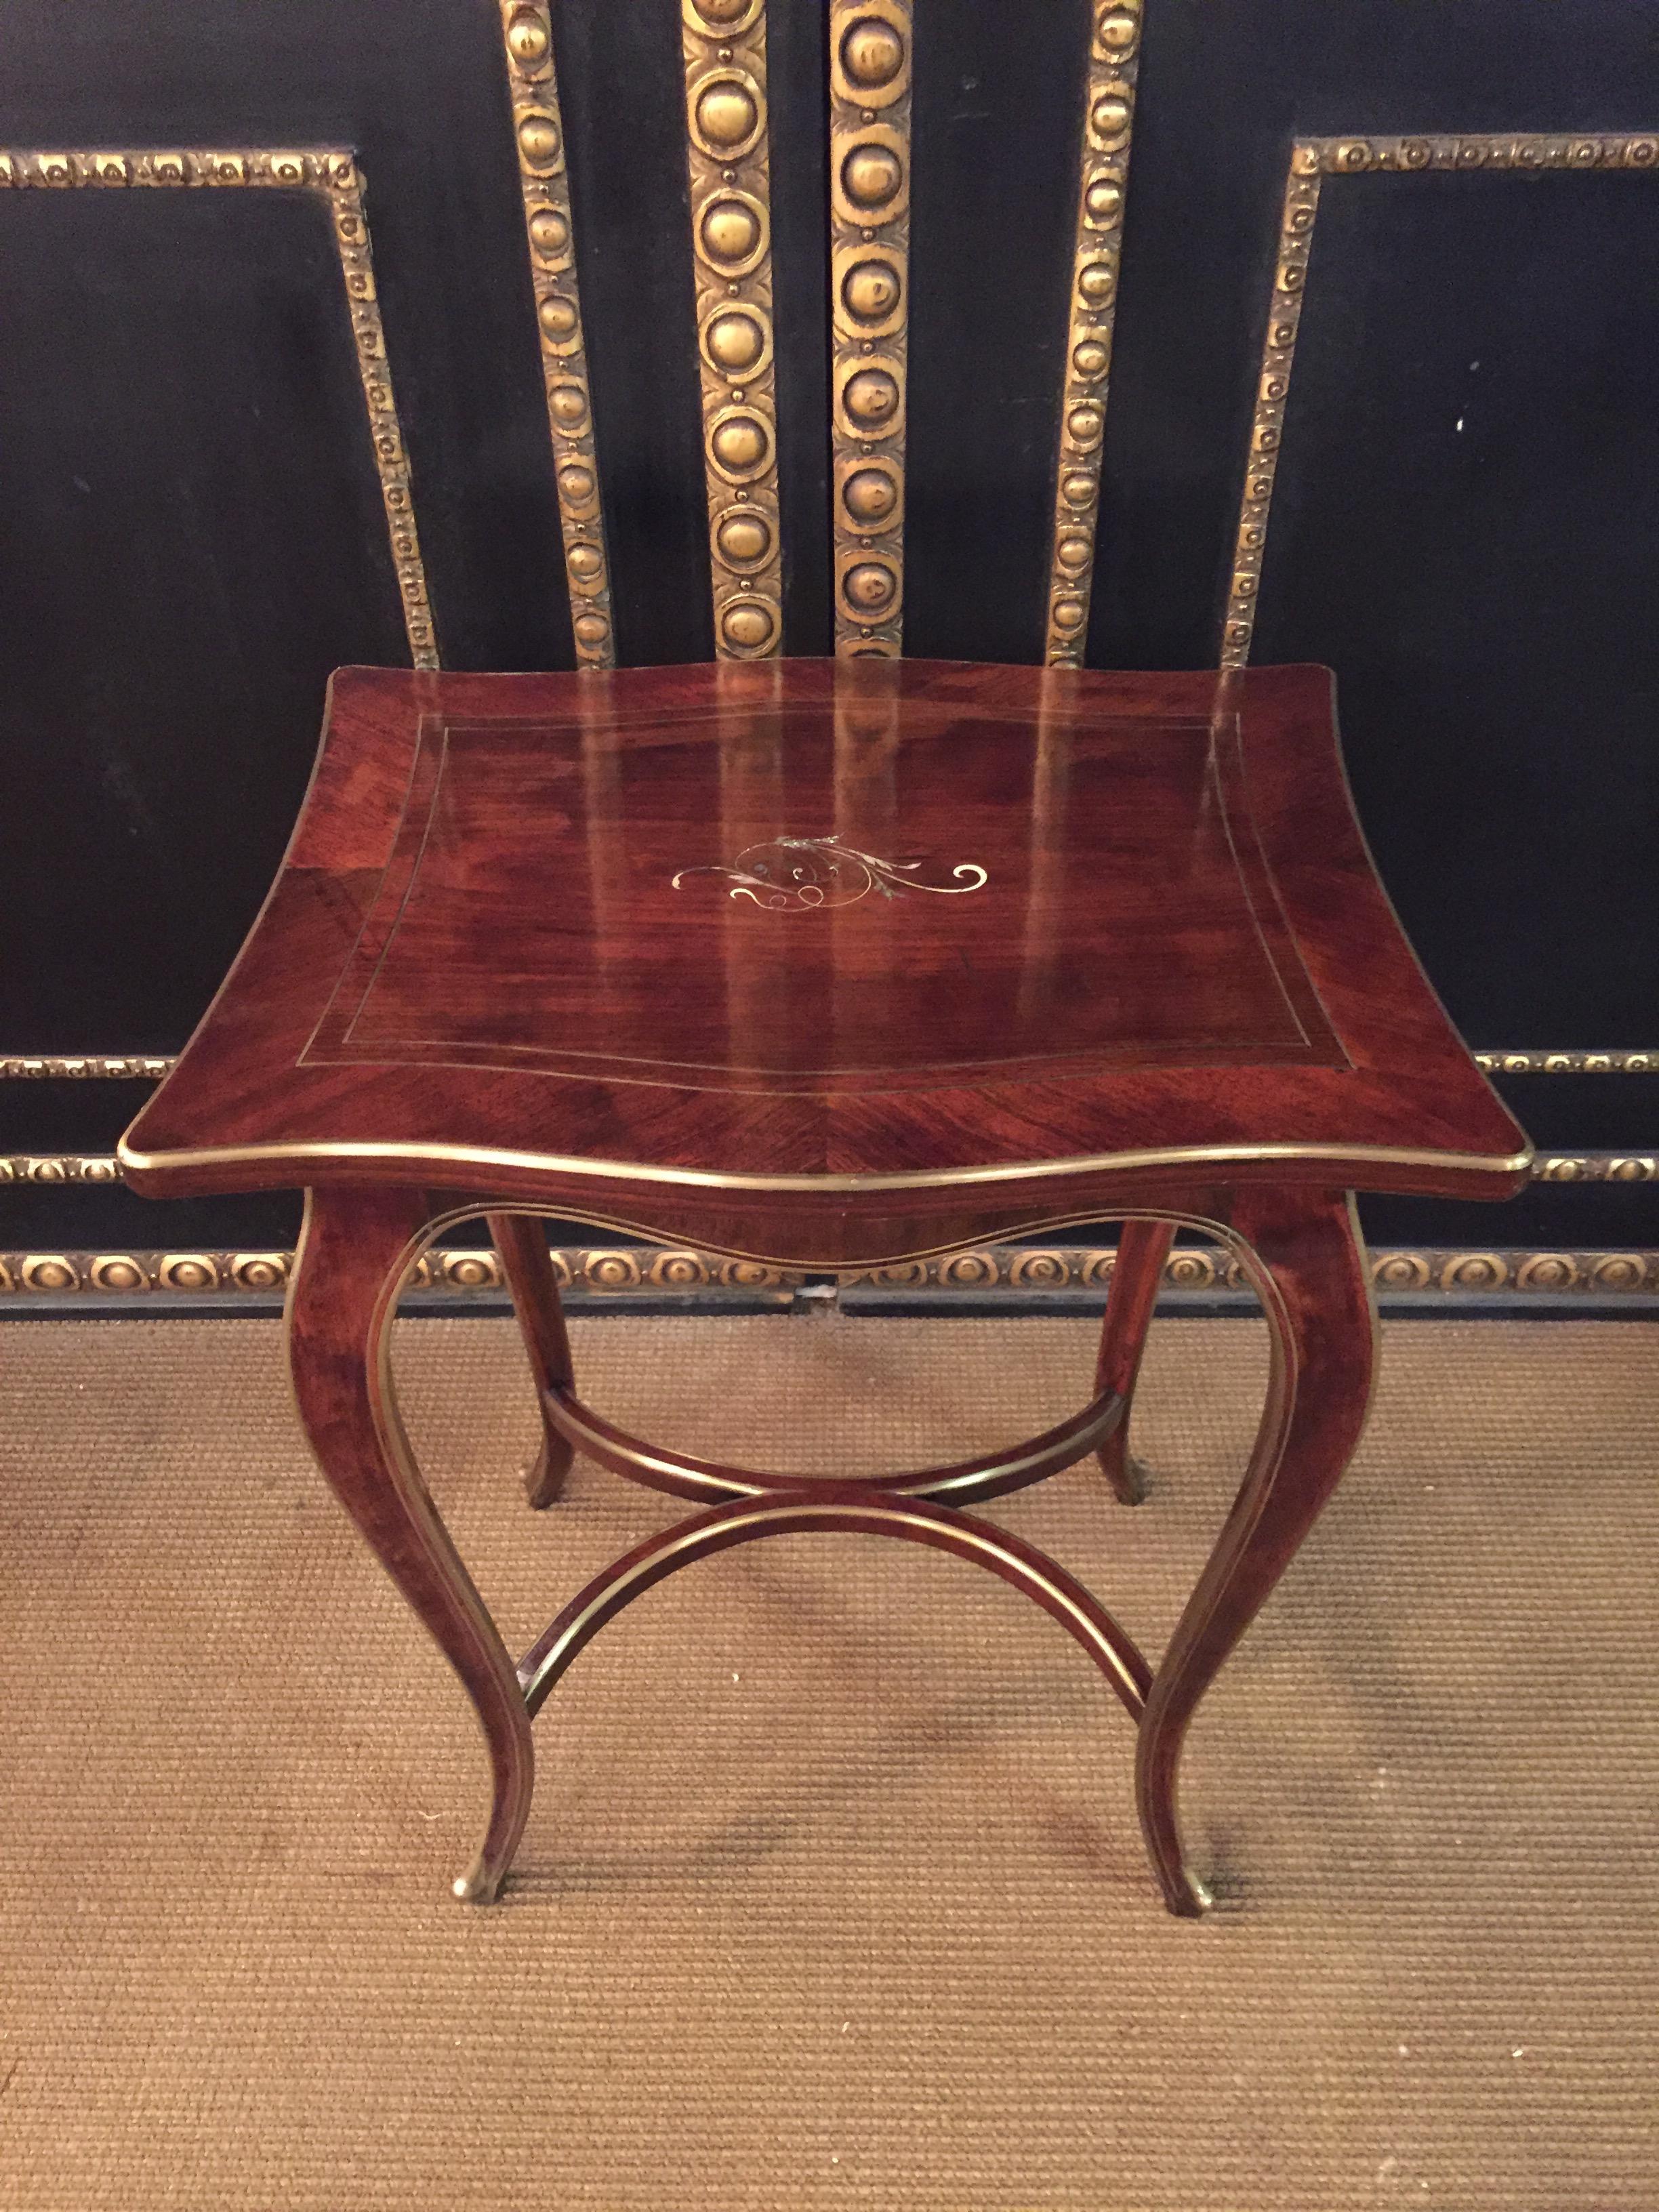 German Antique Biedermeier Table Mahogany Inlaid with Mother Pearl 1870